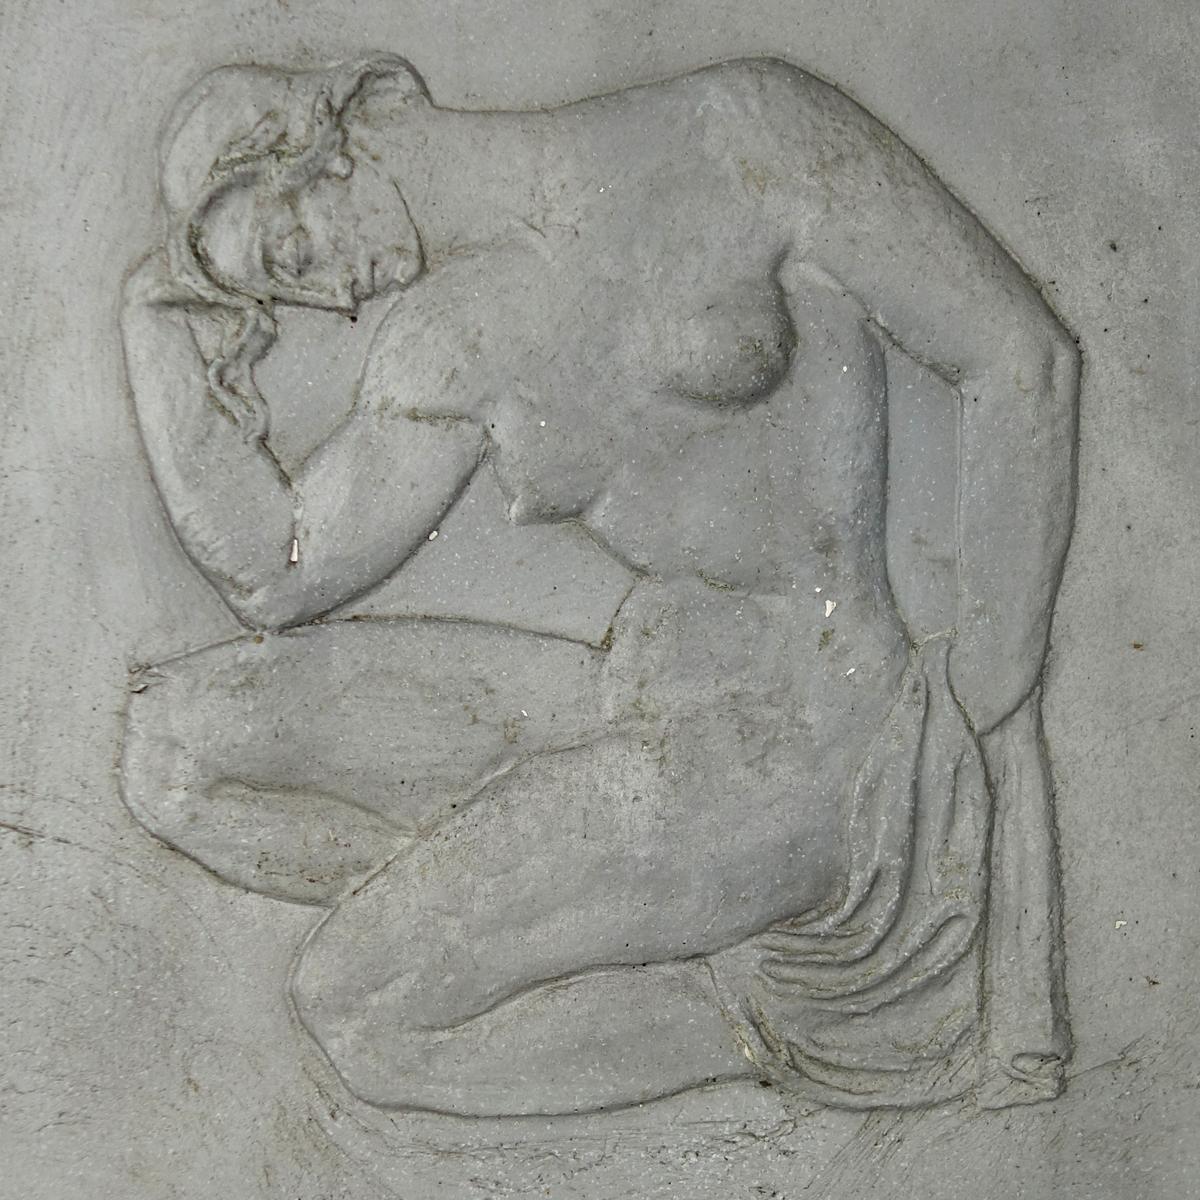 This plain and austere plaquette shows us a muscular Roman young man wearing just a loincloth. Squatting on the ground he sits, in the typical position of the Le Penseur artwork by Rodin, in a brown study.
The plaquette originates from the facade